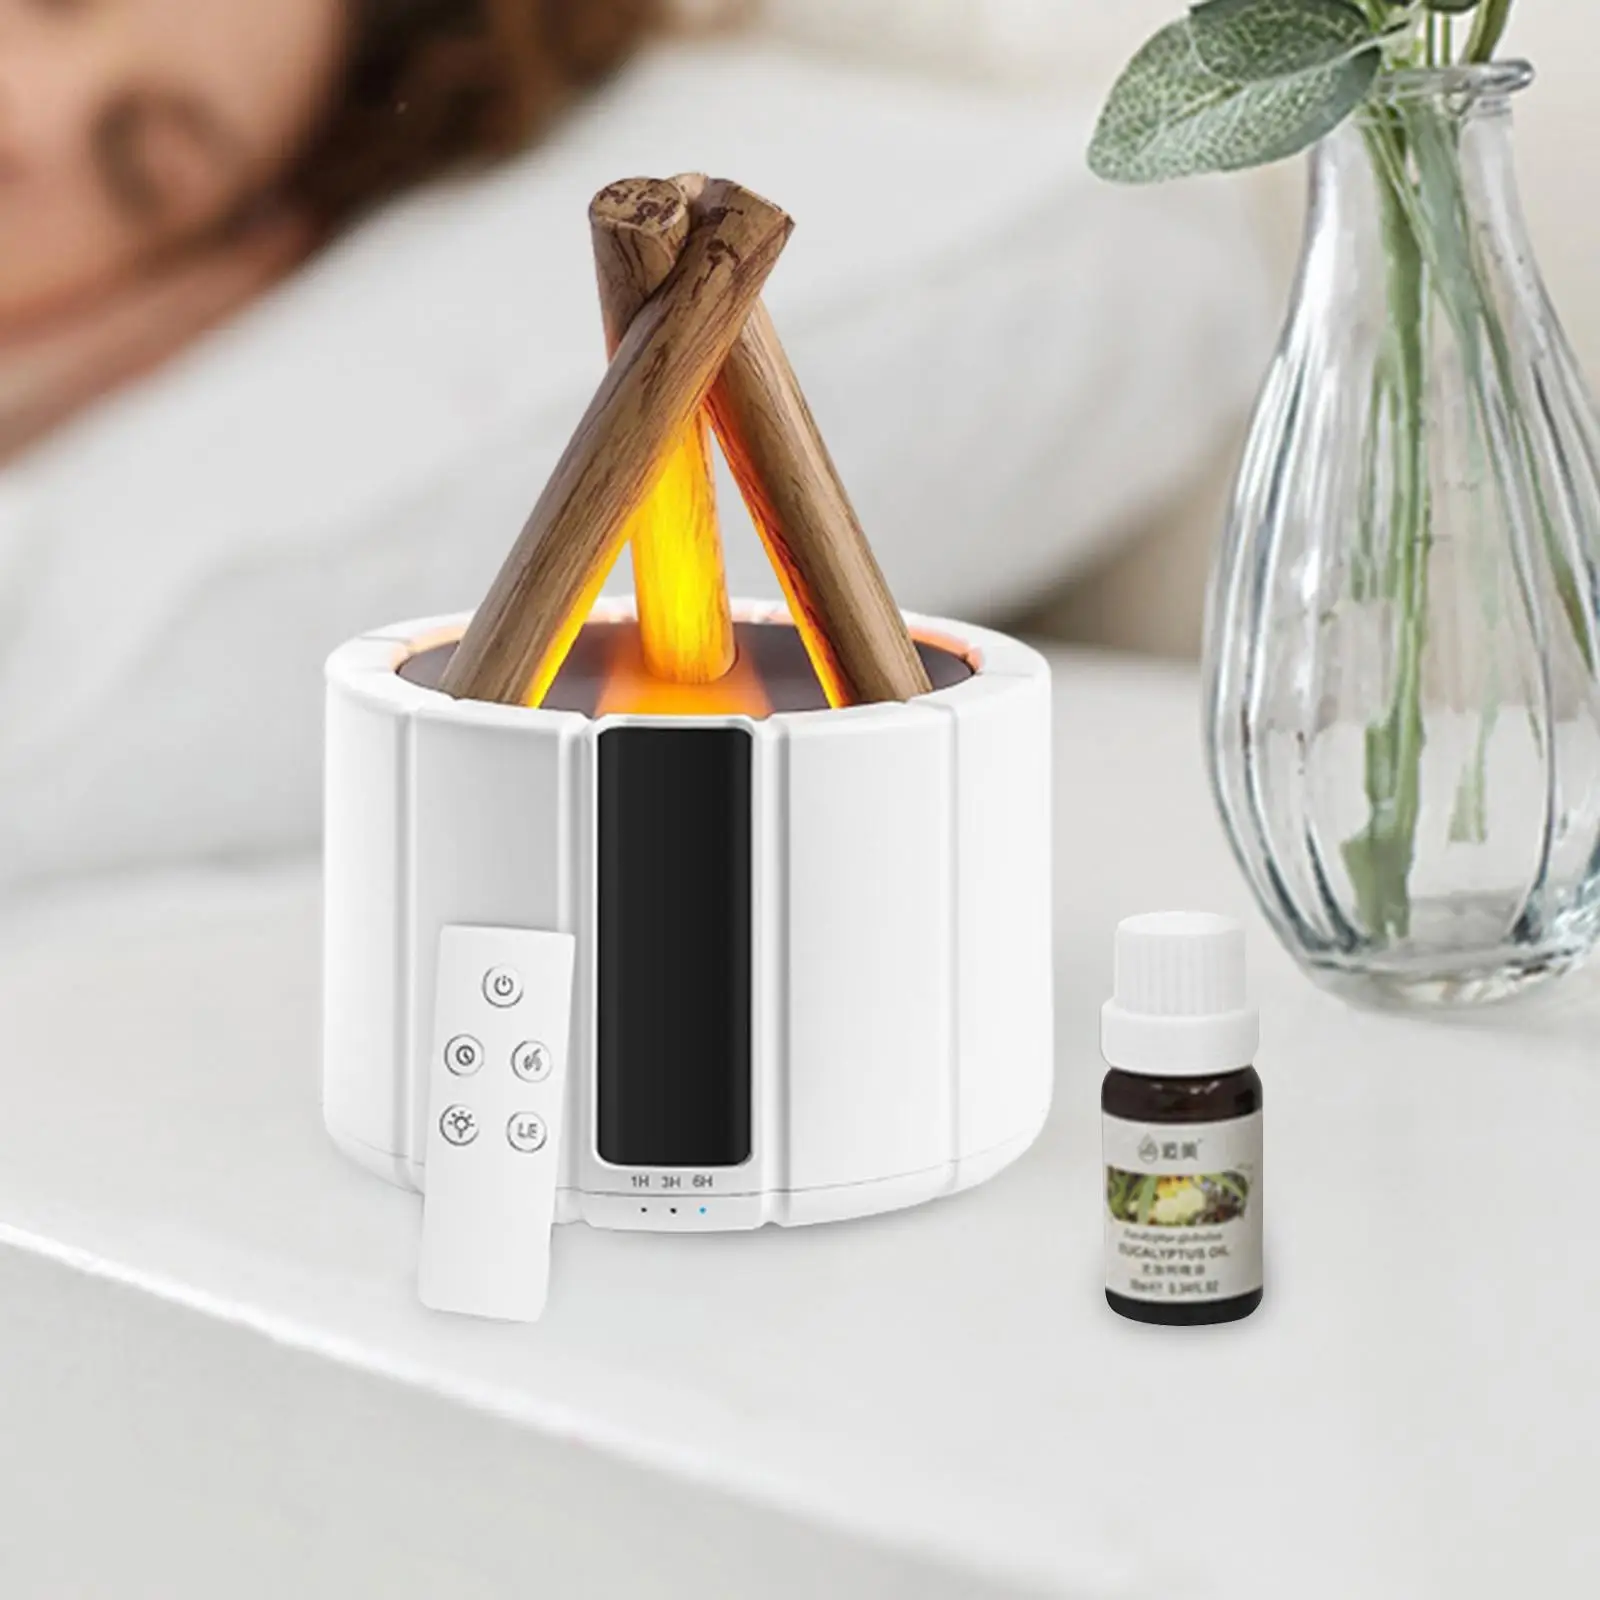 Flame Aroma Diffuser Gift Simulated Fireplace 250ml Mist Sprayer Air Humidifier for Home Room SPA Gym Study Office Decor Desktop